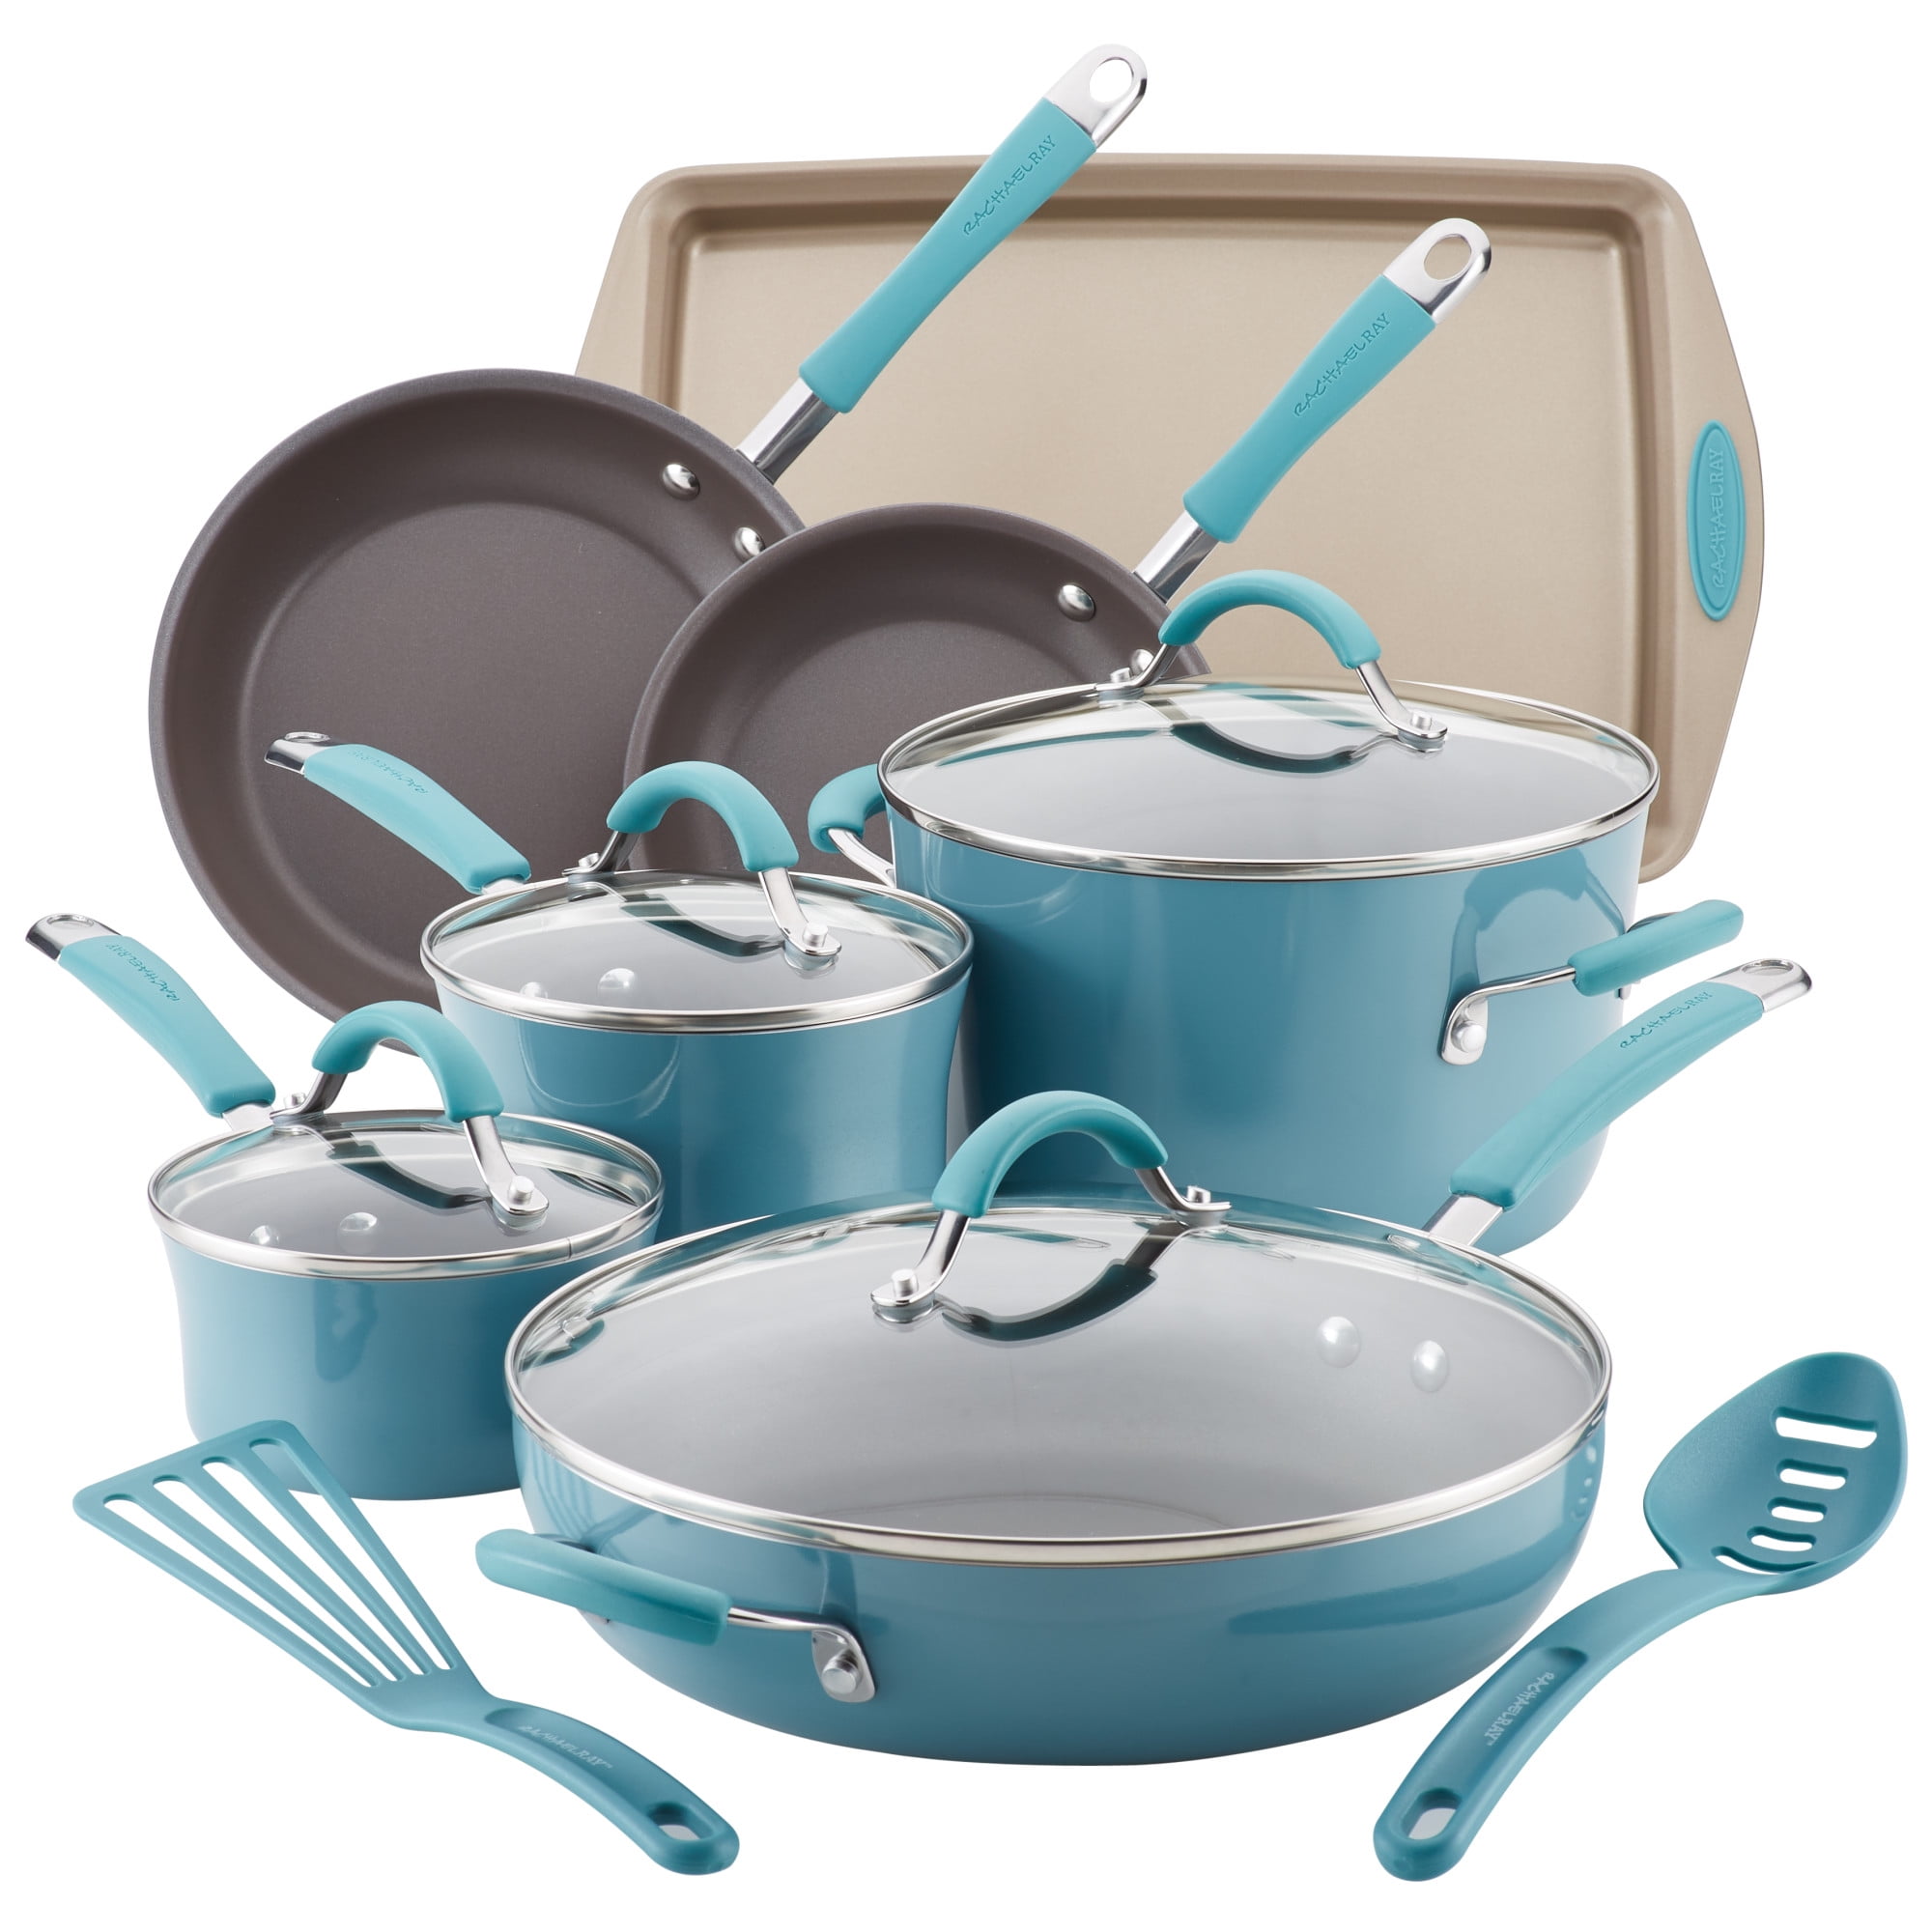 Rachael Ray 16344 Cucina Enamel Nonstick Cookware Agave Blue 12 Count for sale online 